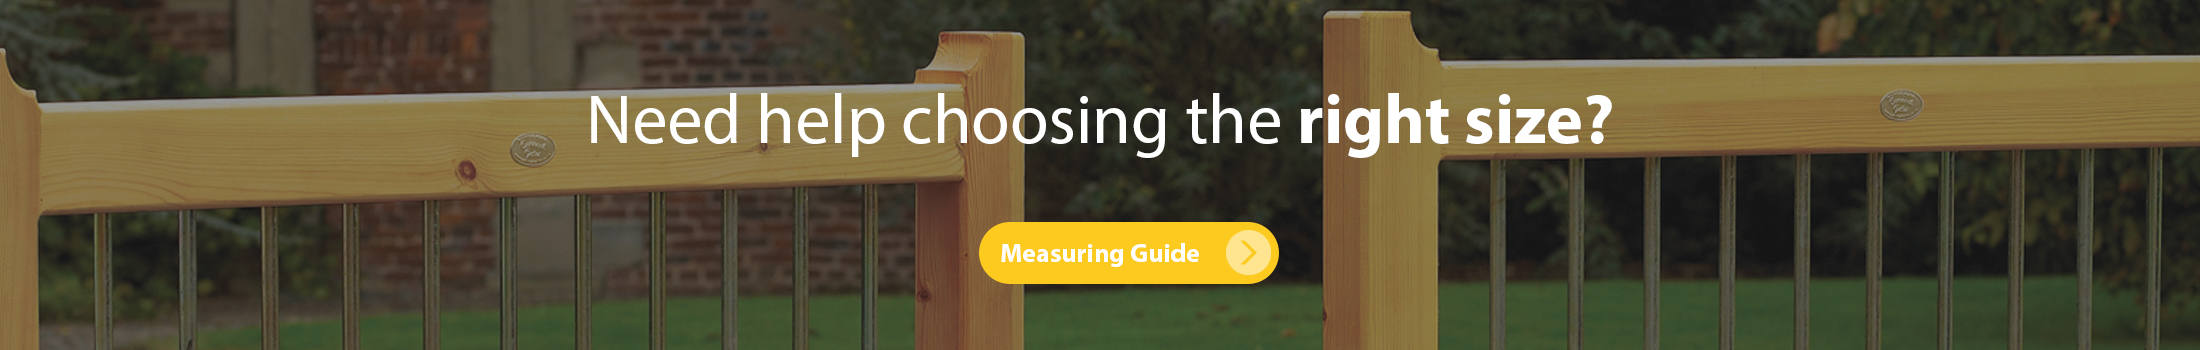 View the measuring guide for more information about ordering sizes